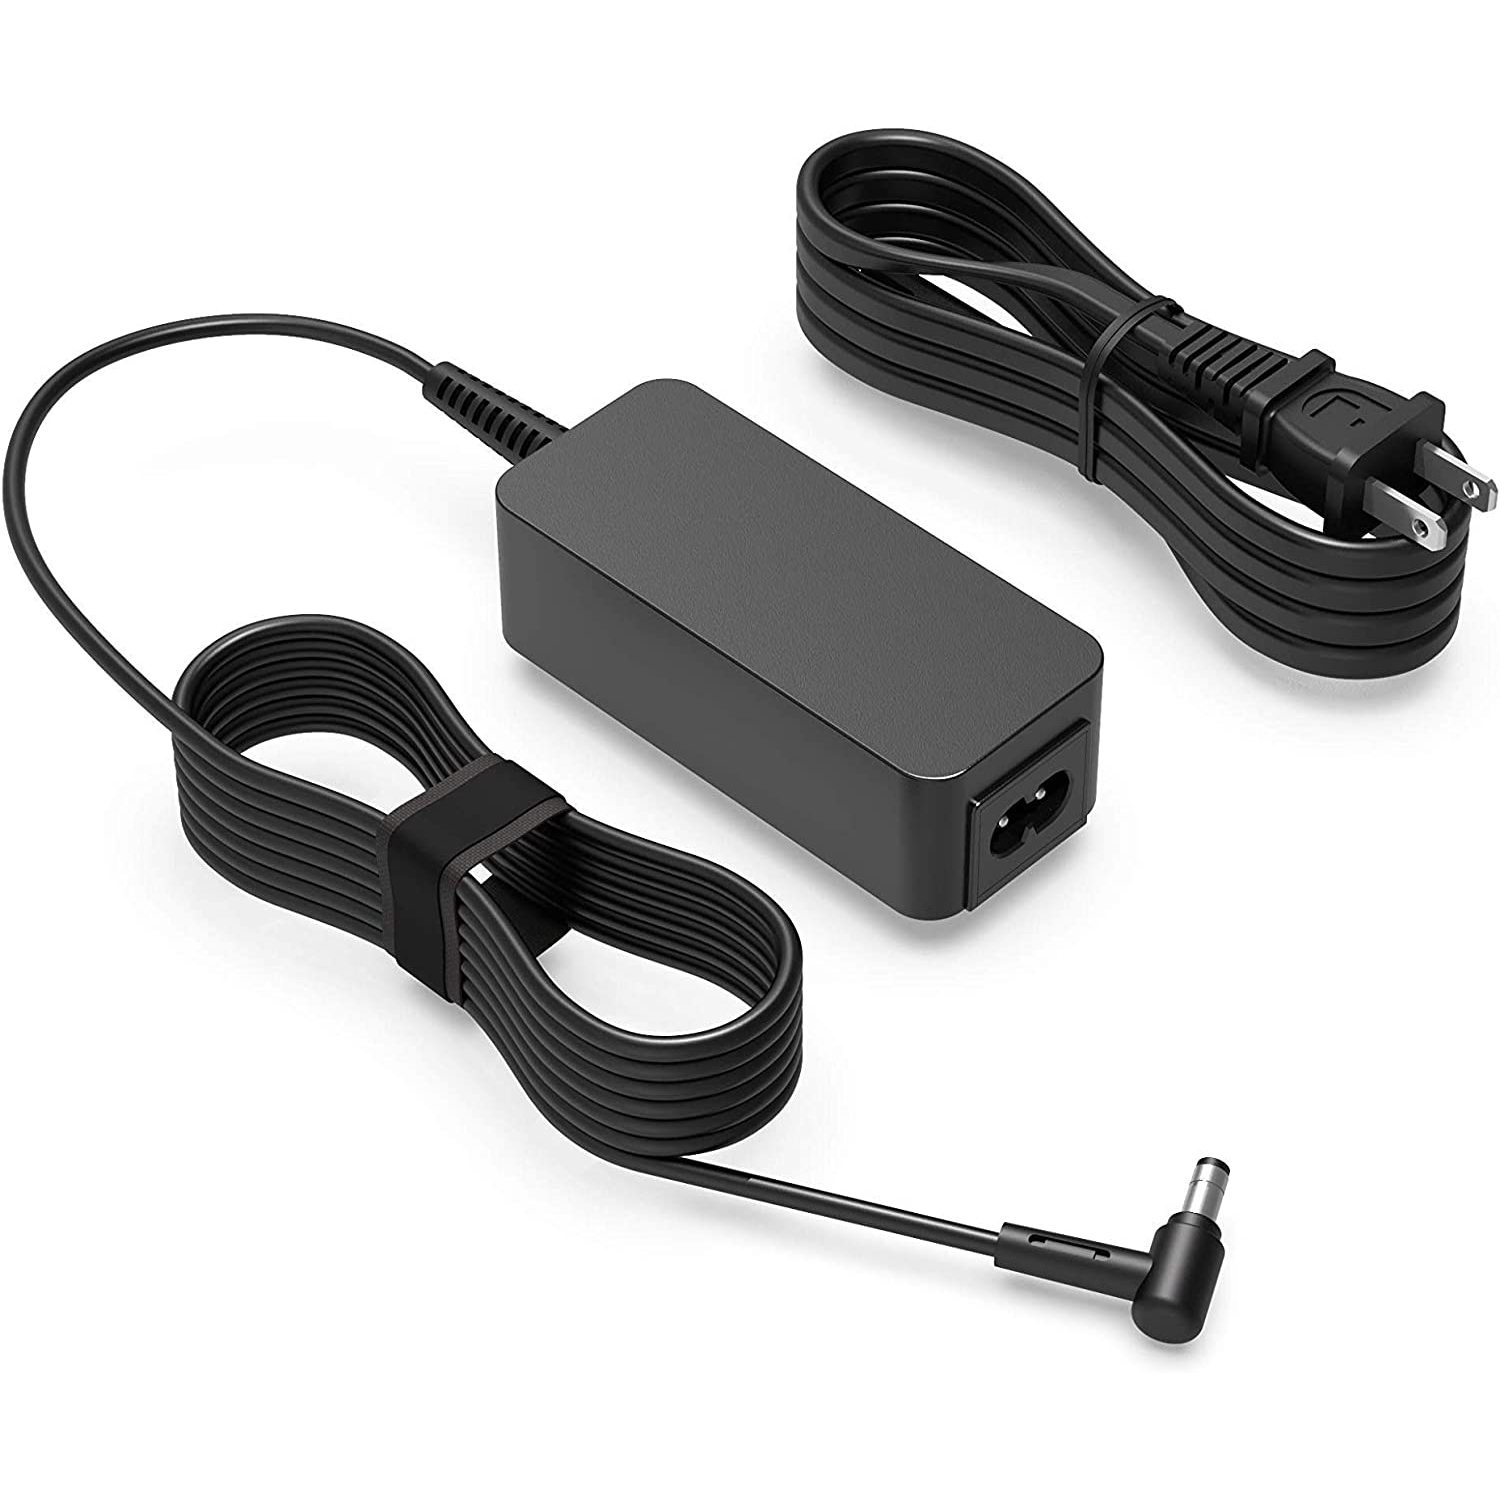 UL Listed AC Charger Fit for Asus Chromebook C202 C202S C202SA Laptop Power Supply Adapter Cord